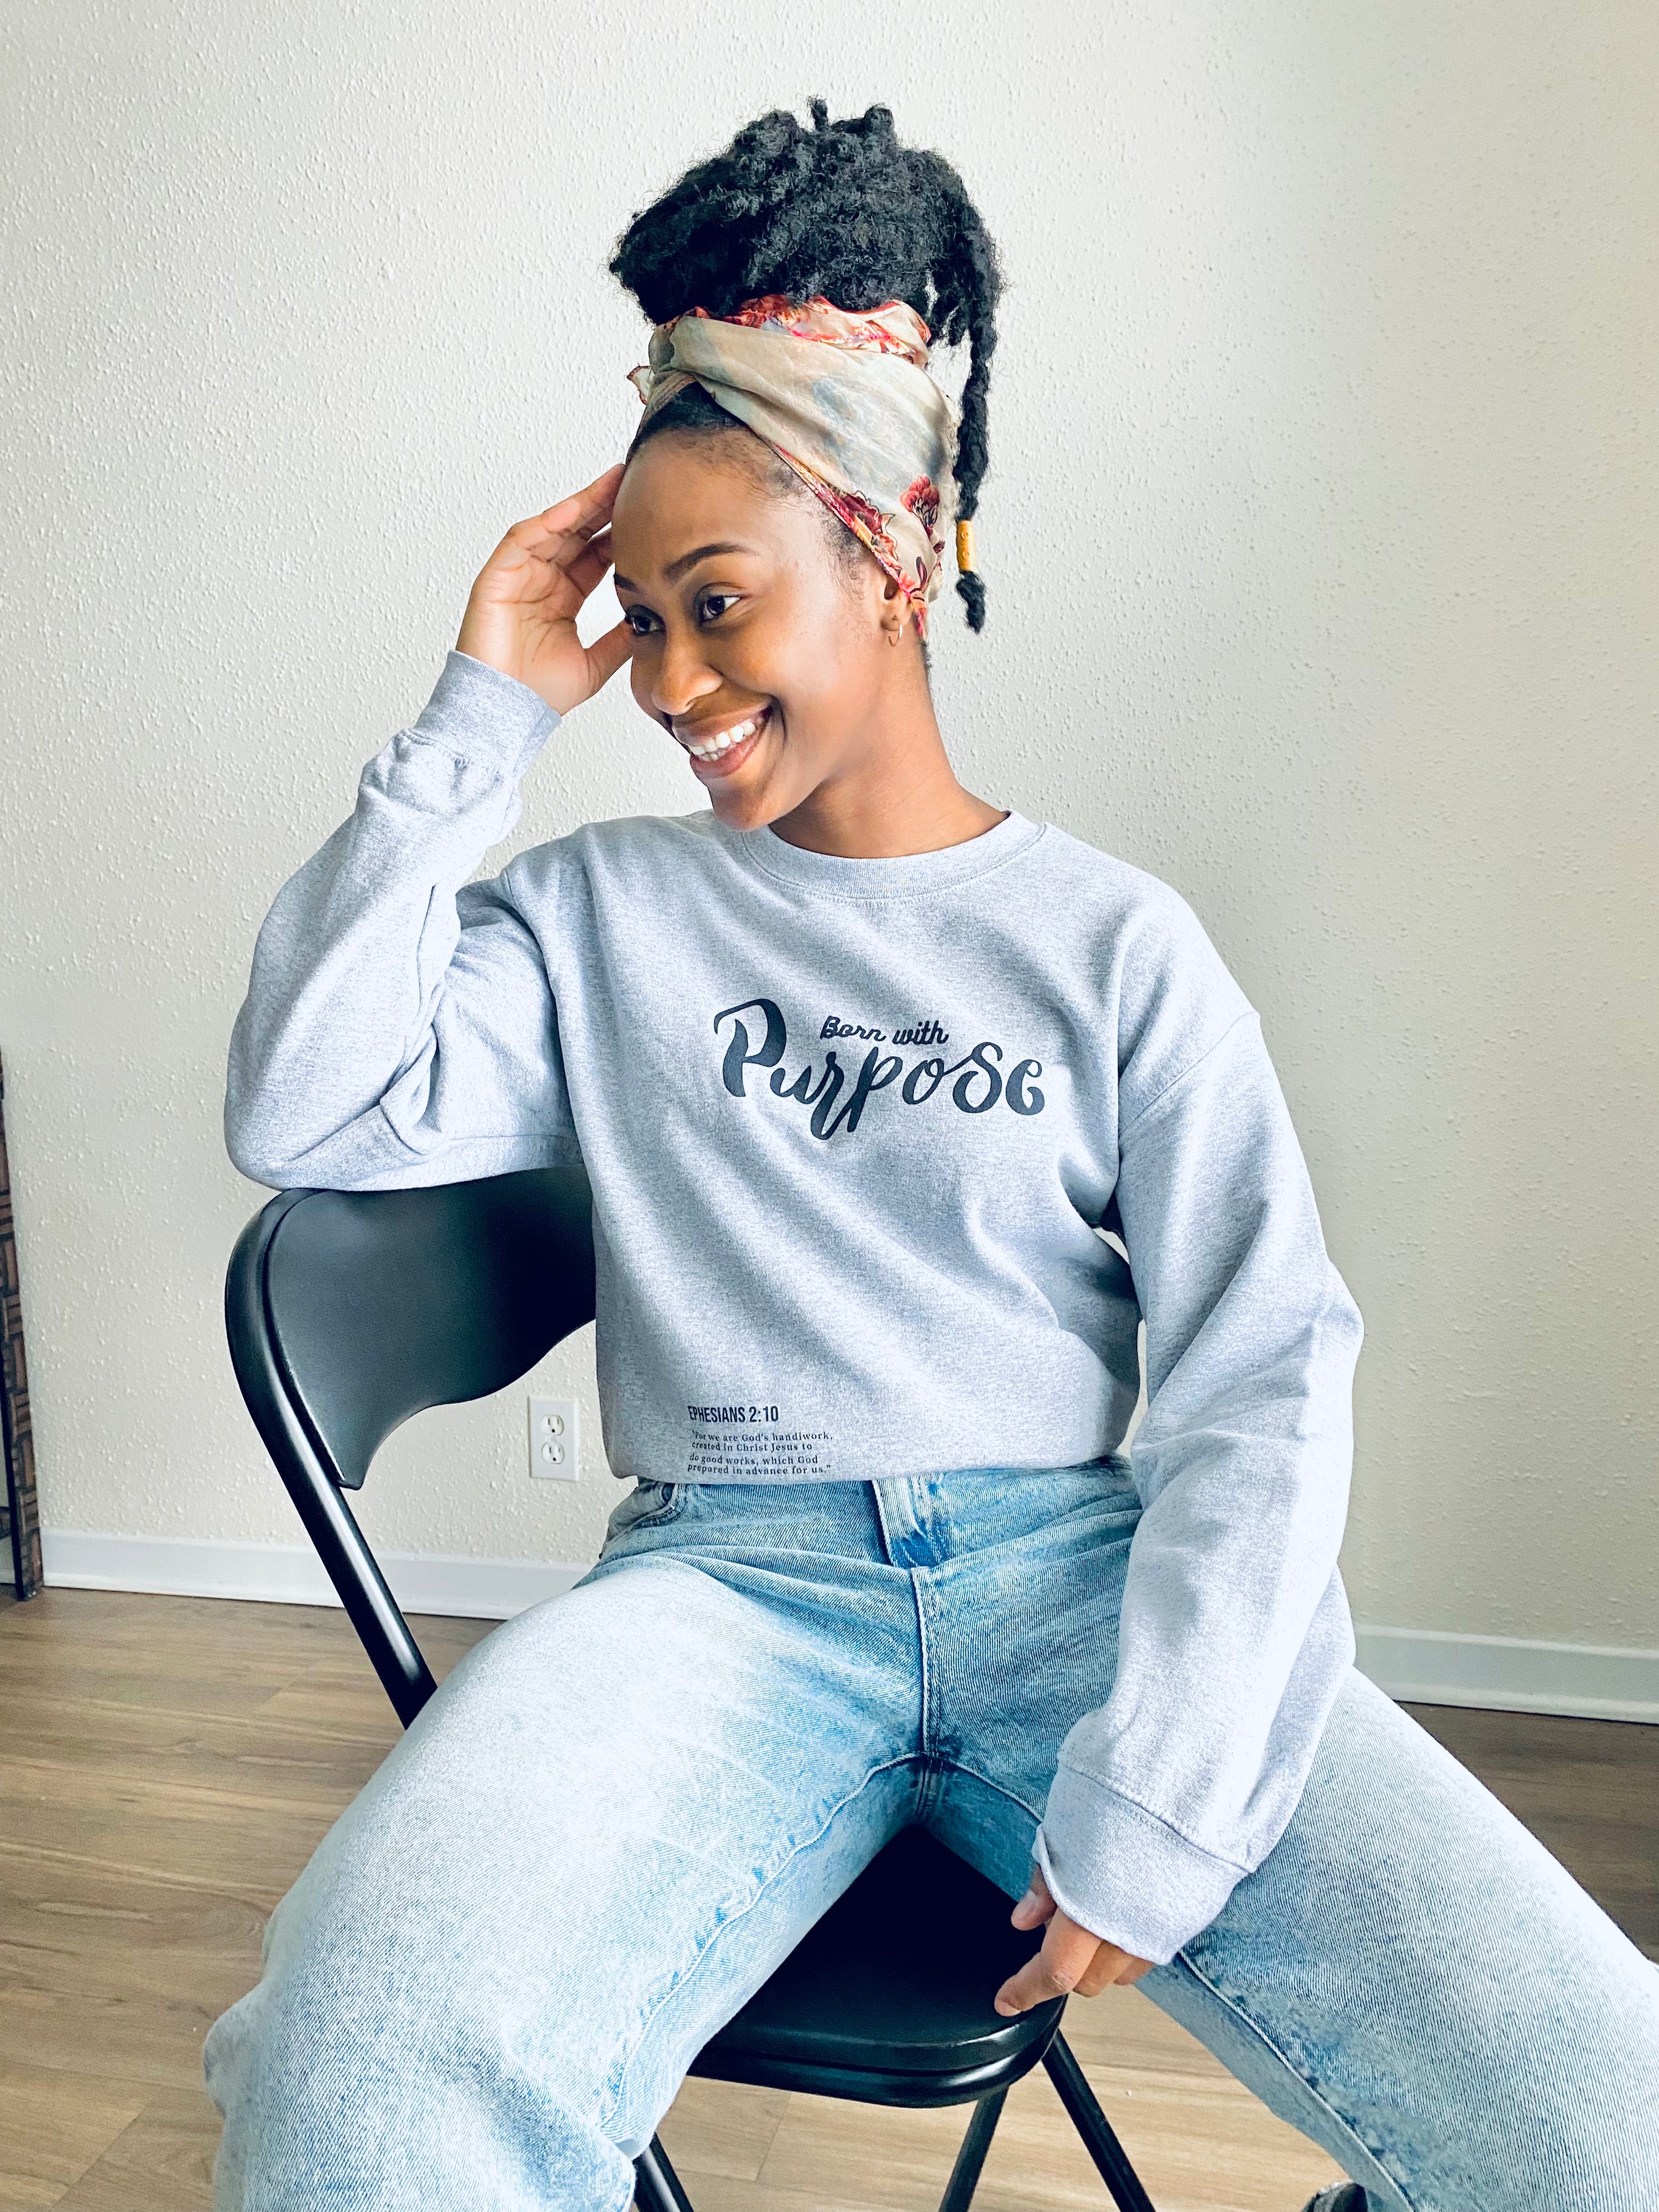 Our lovely grey crew neck that says "Born with Purpose". this is a message to everyone encouraging them to never give up on life, they are here for a reason, not by mistake.